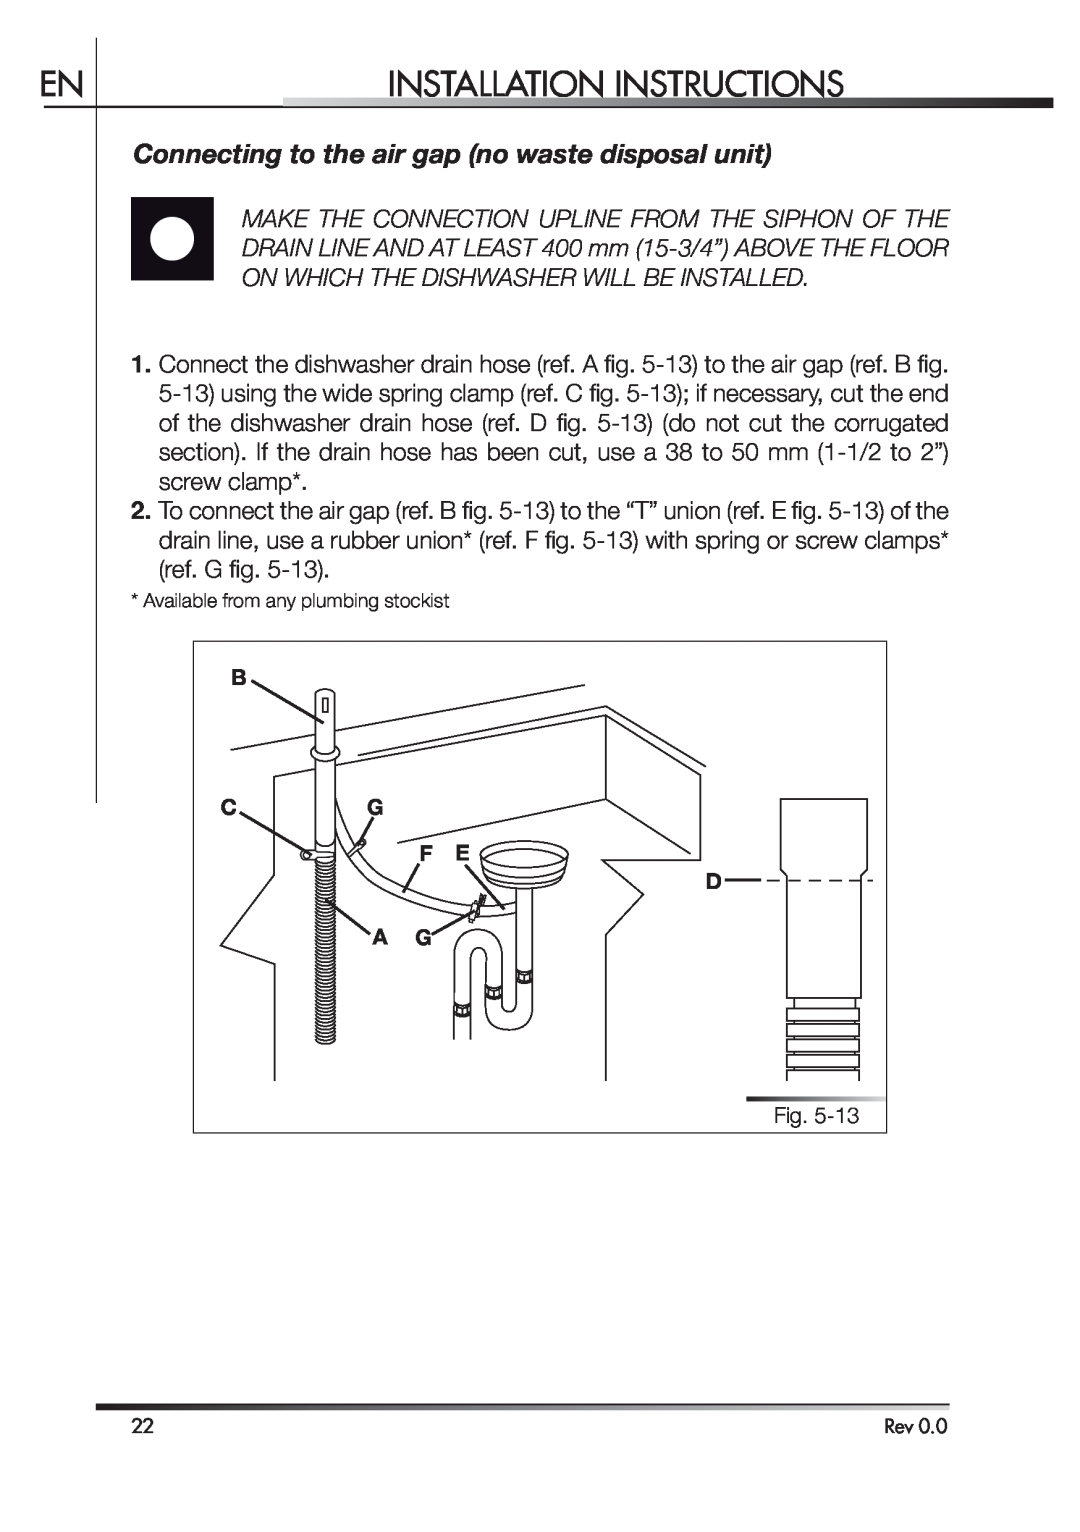 Smeg STA4645 instruction manual Connecting to the air gap no waste disposal unit, Installation Instructions 